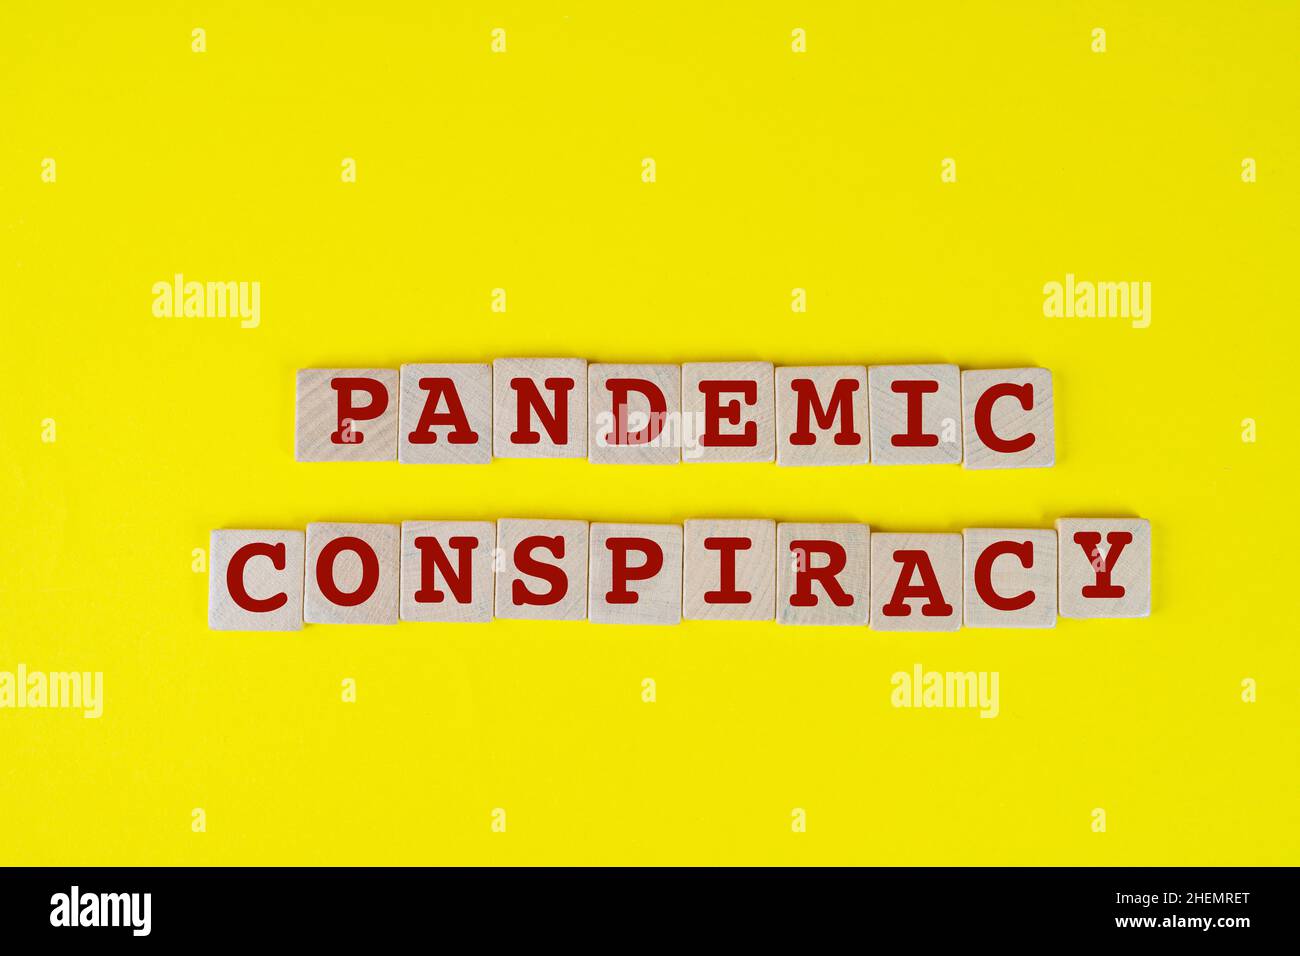 pandemic conspiracy written on some wooden dowels Stock Photo